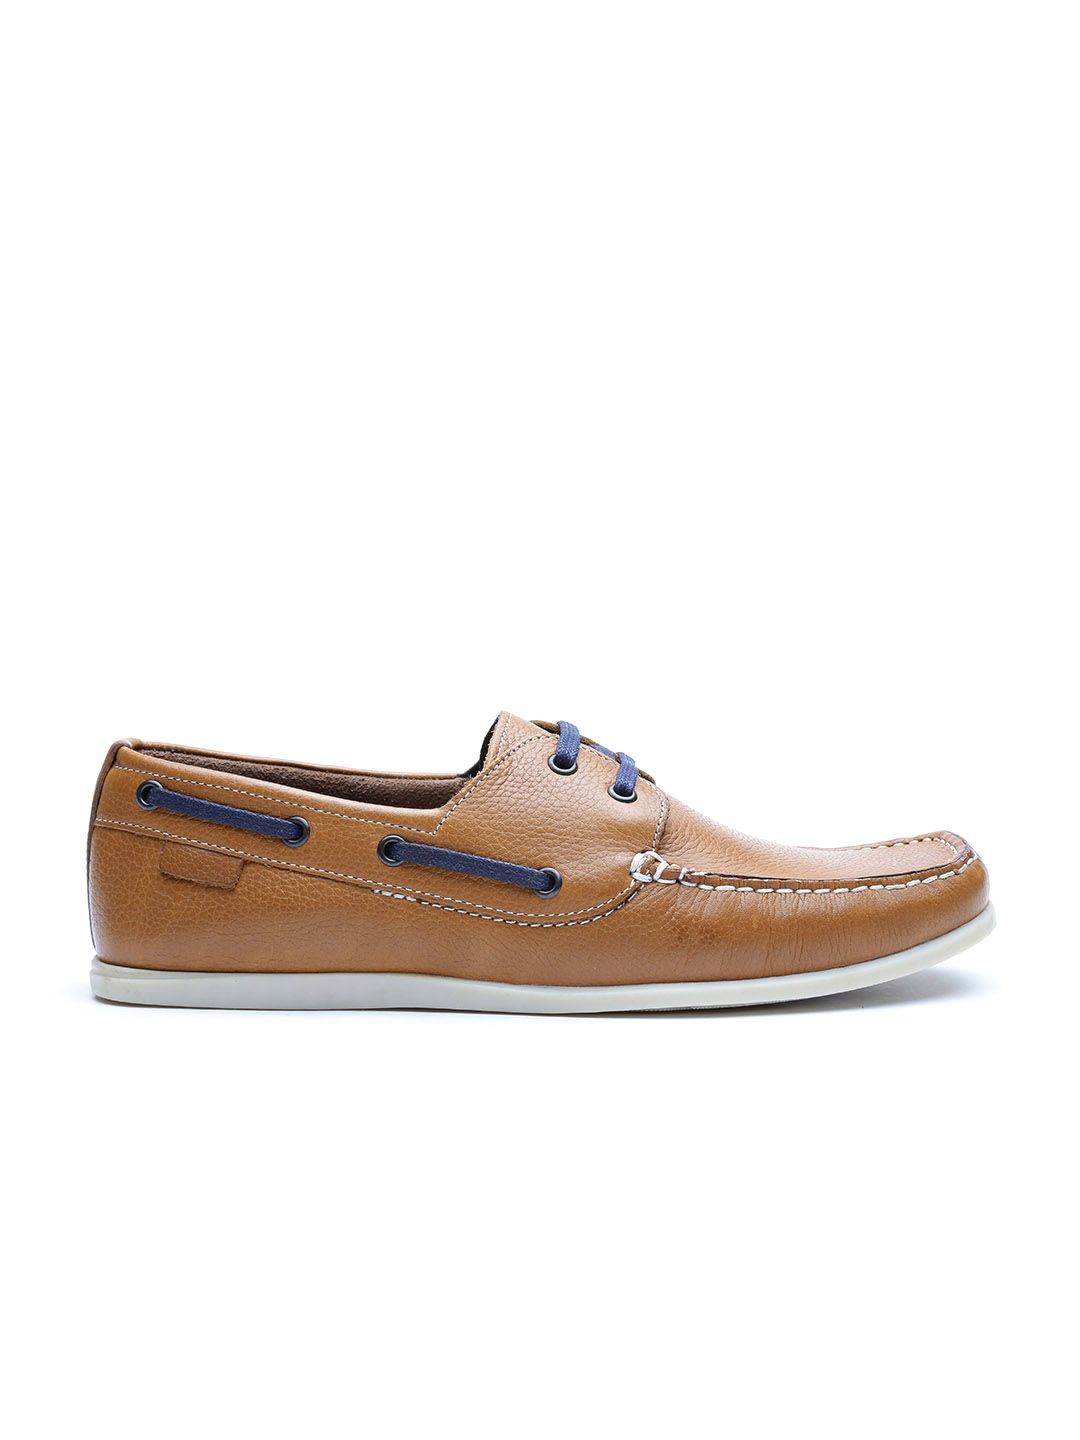 mens boat shoes marks and spencer